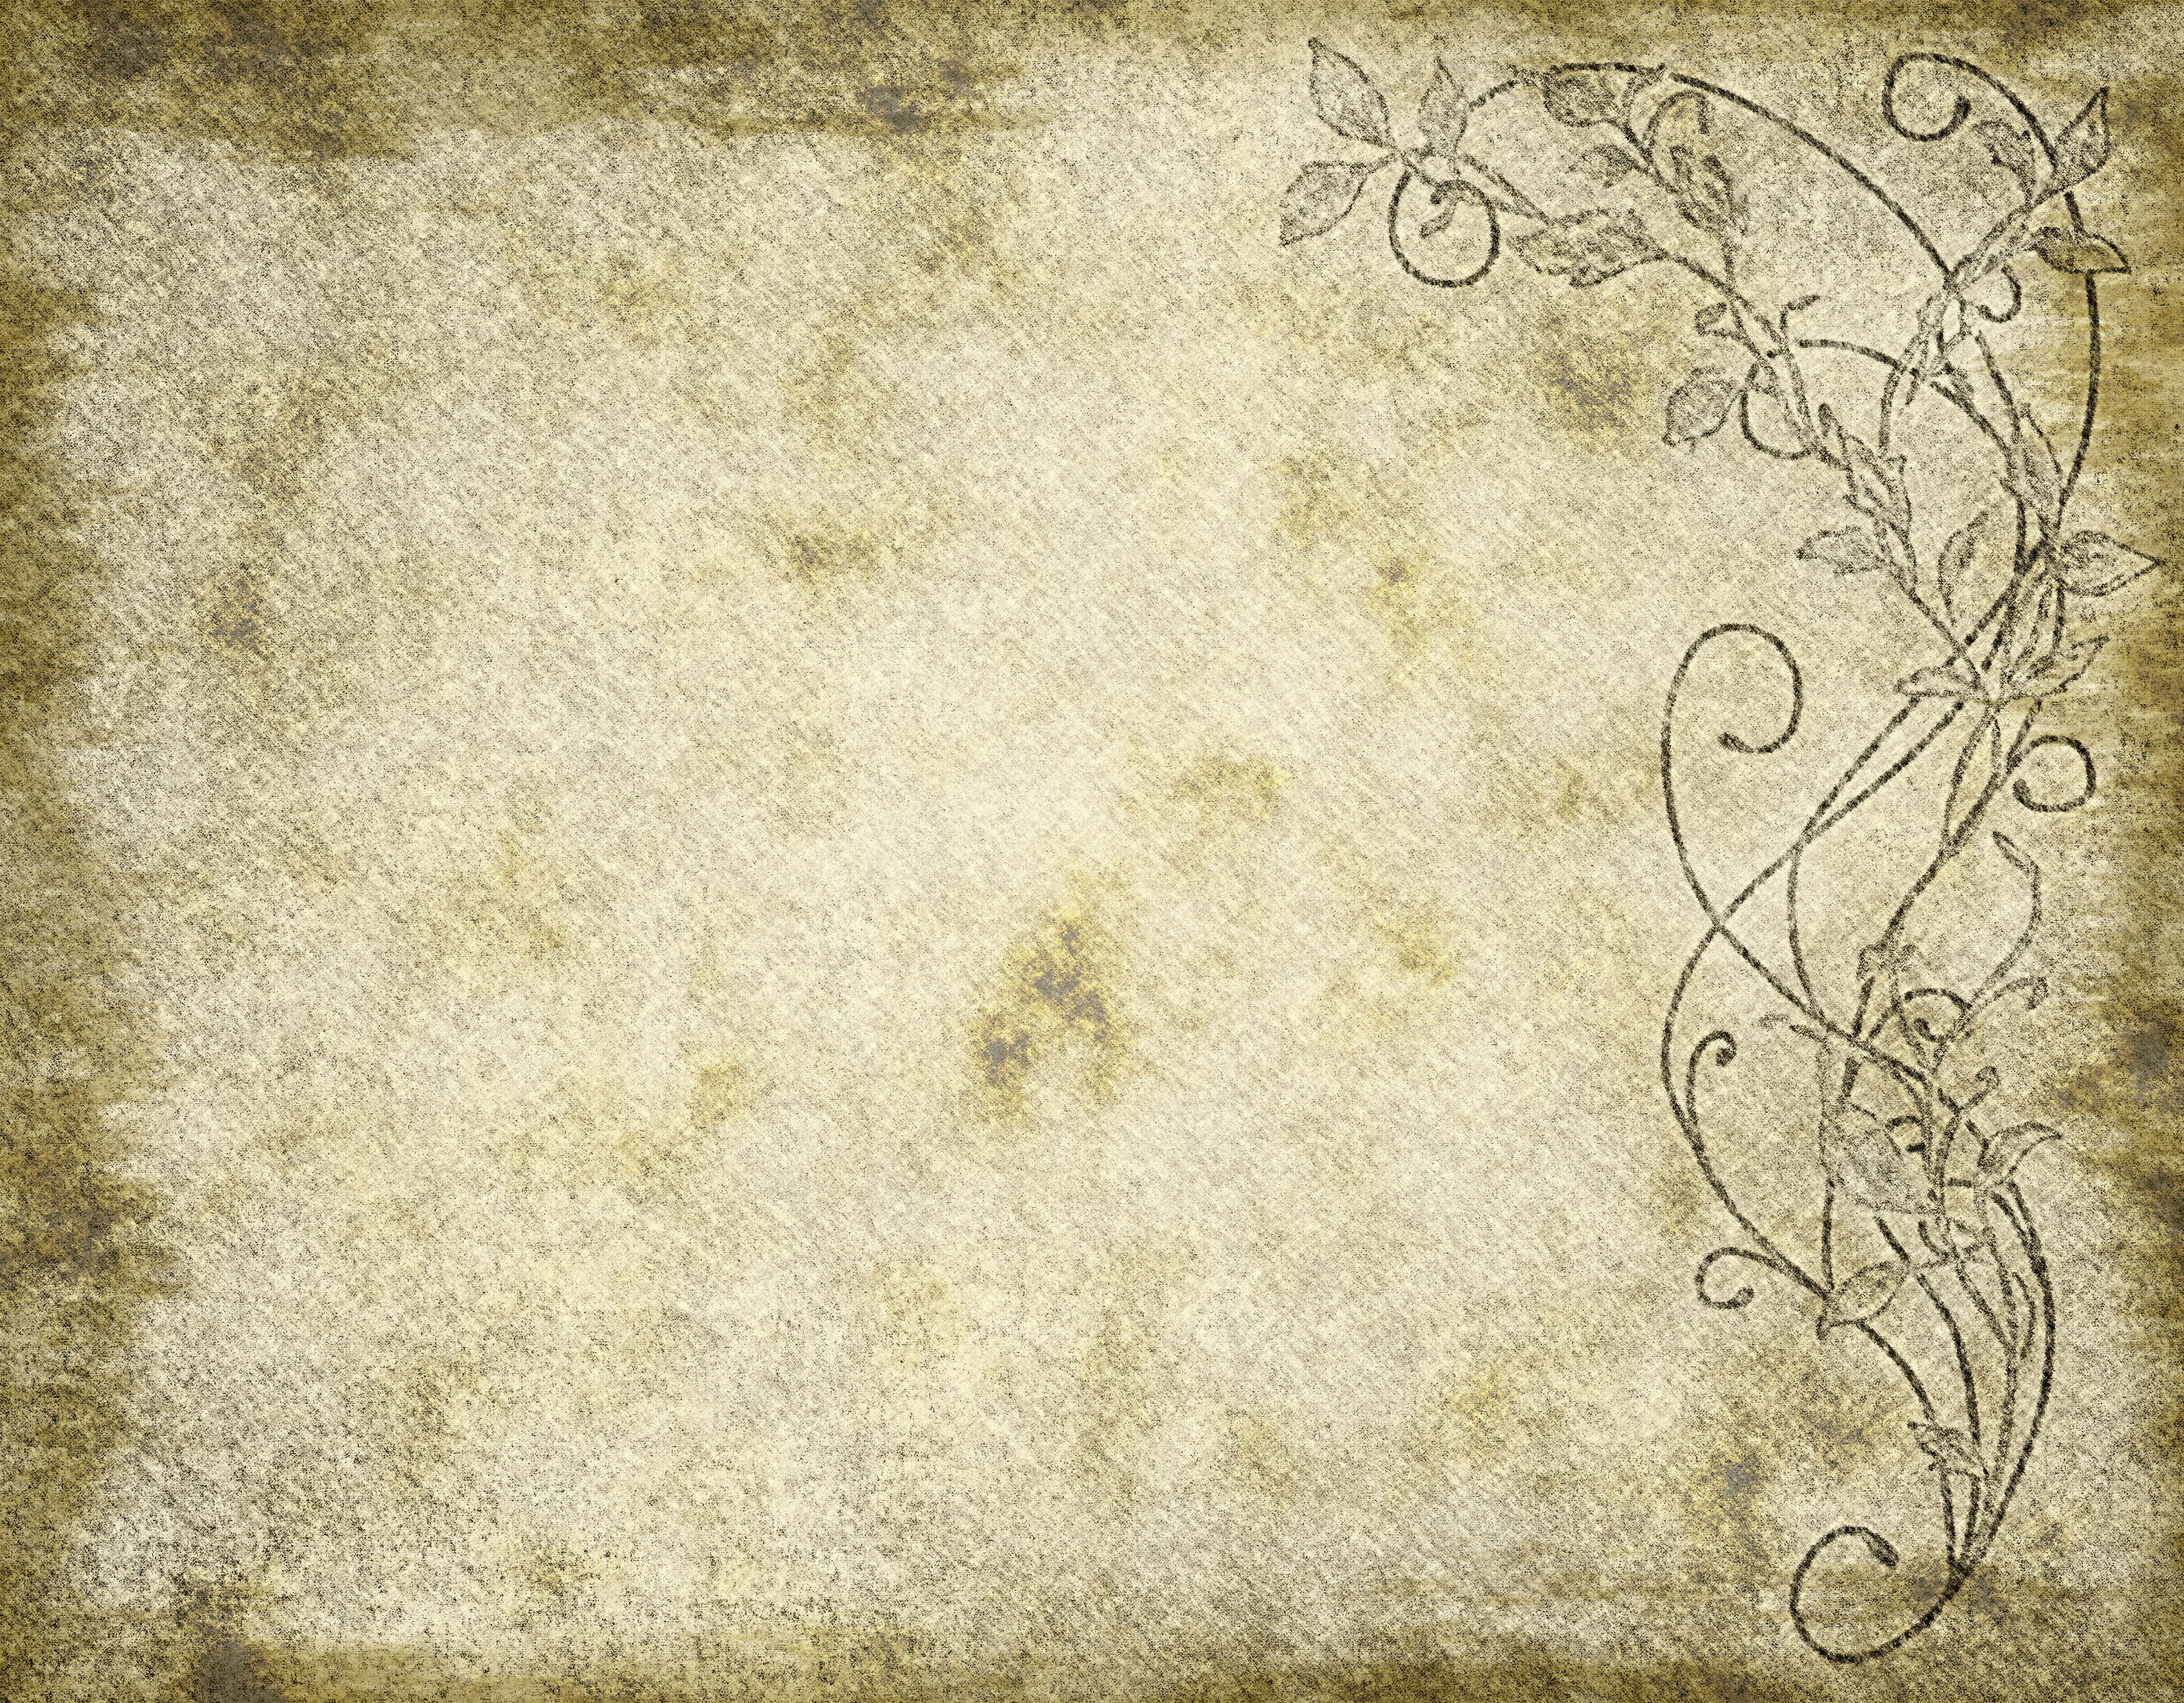 Floral Parchment paper Background Texture with Grunge Effect